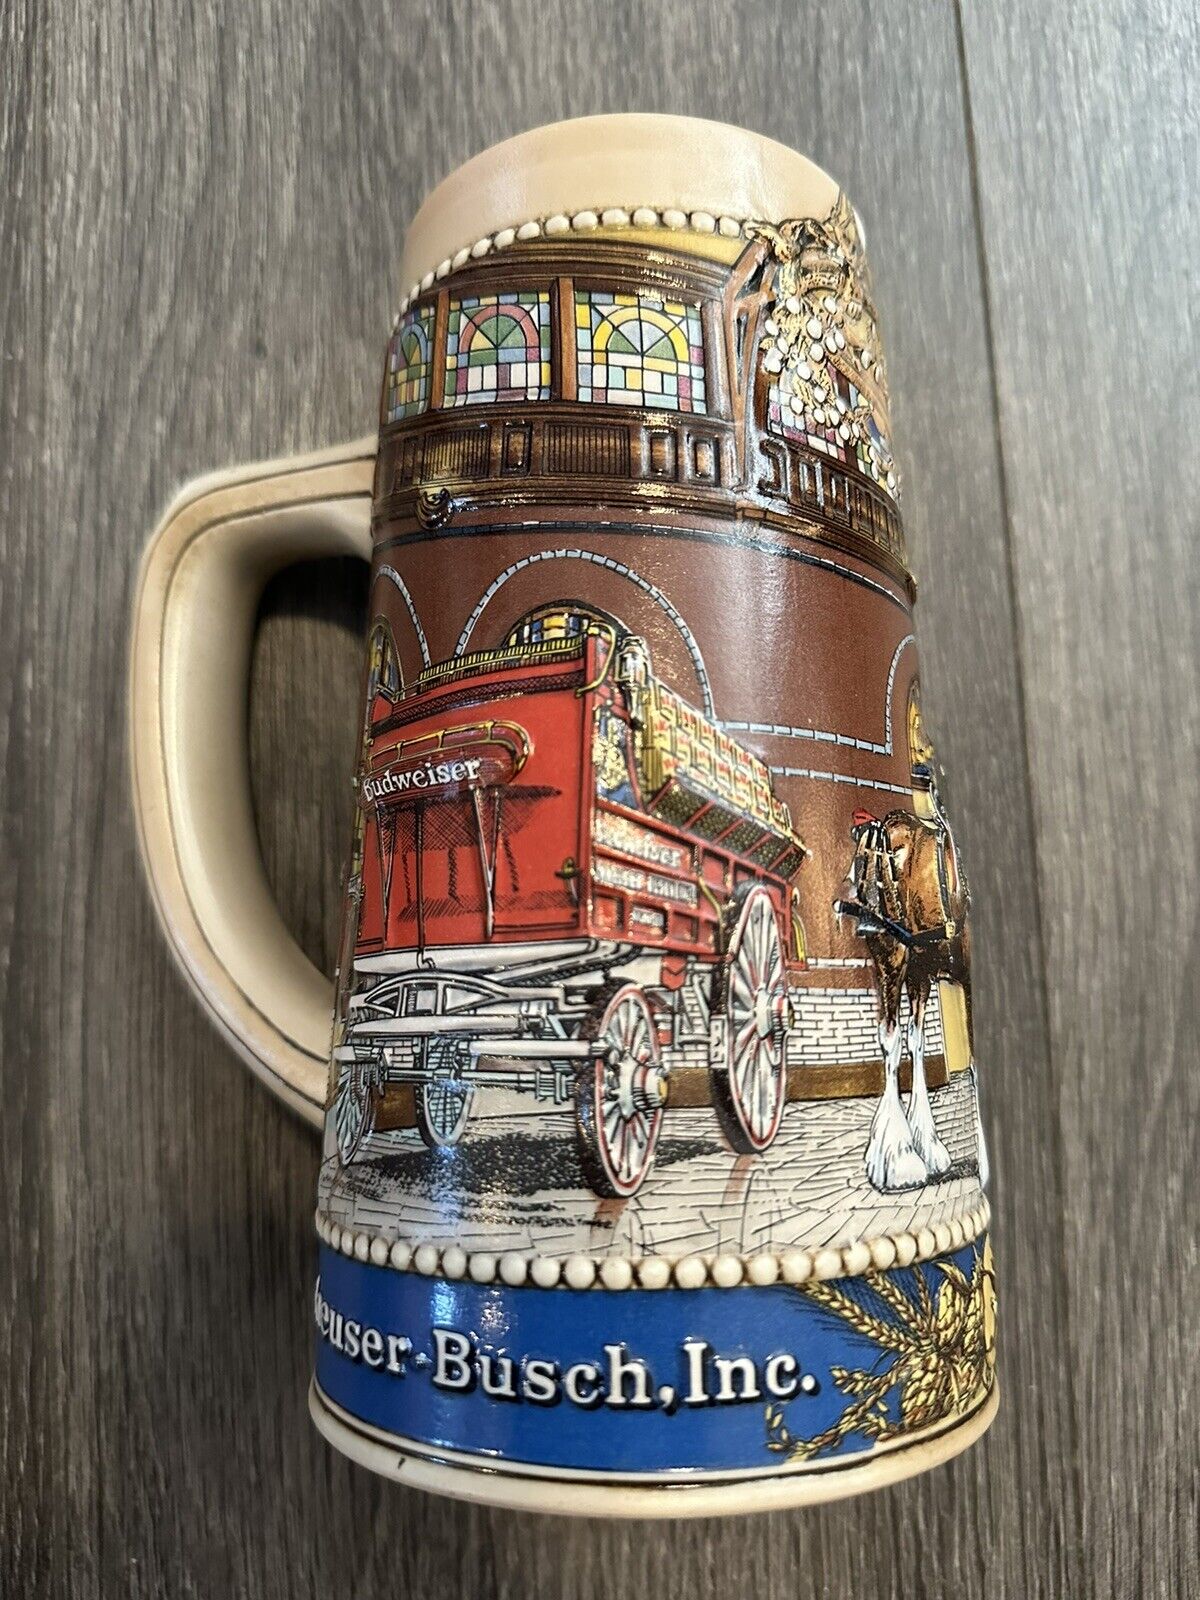 Budweiser Beer Stein National Historical Landmark Series Clydesdale Stables “A”